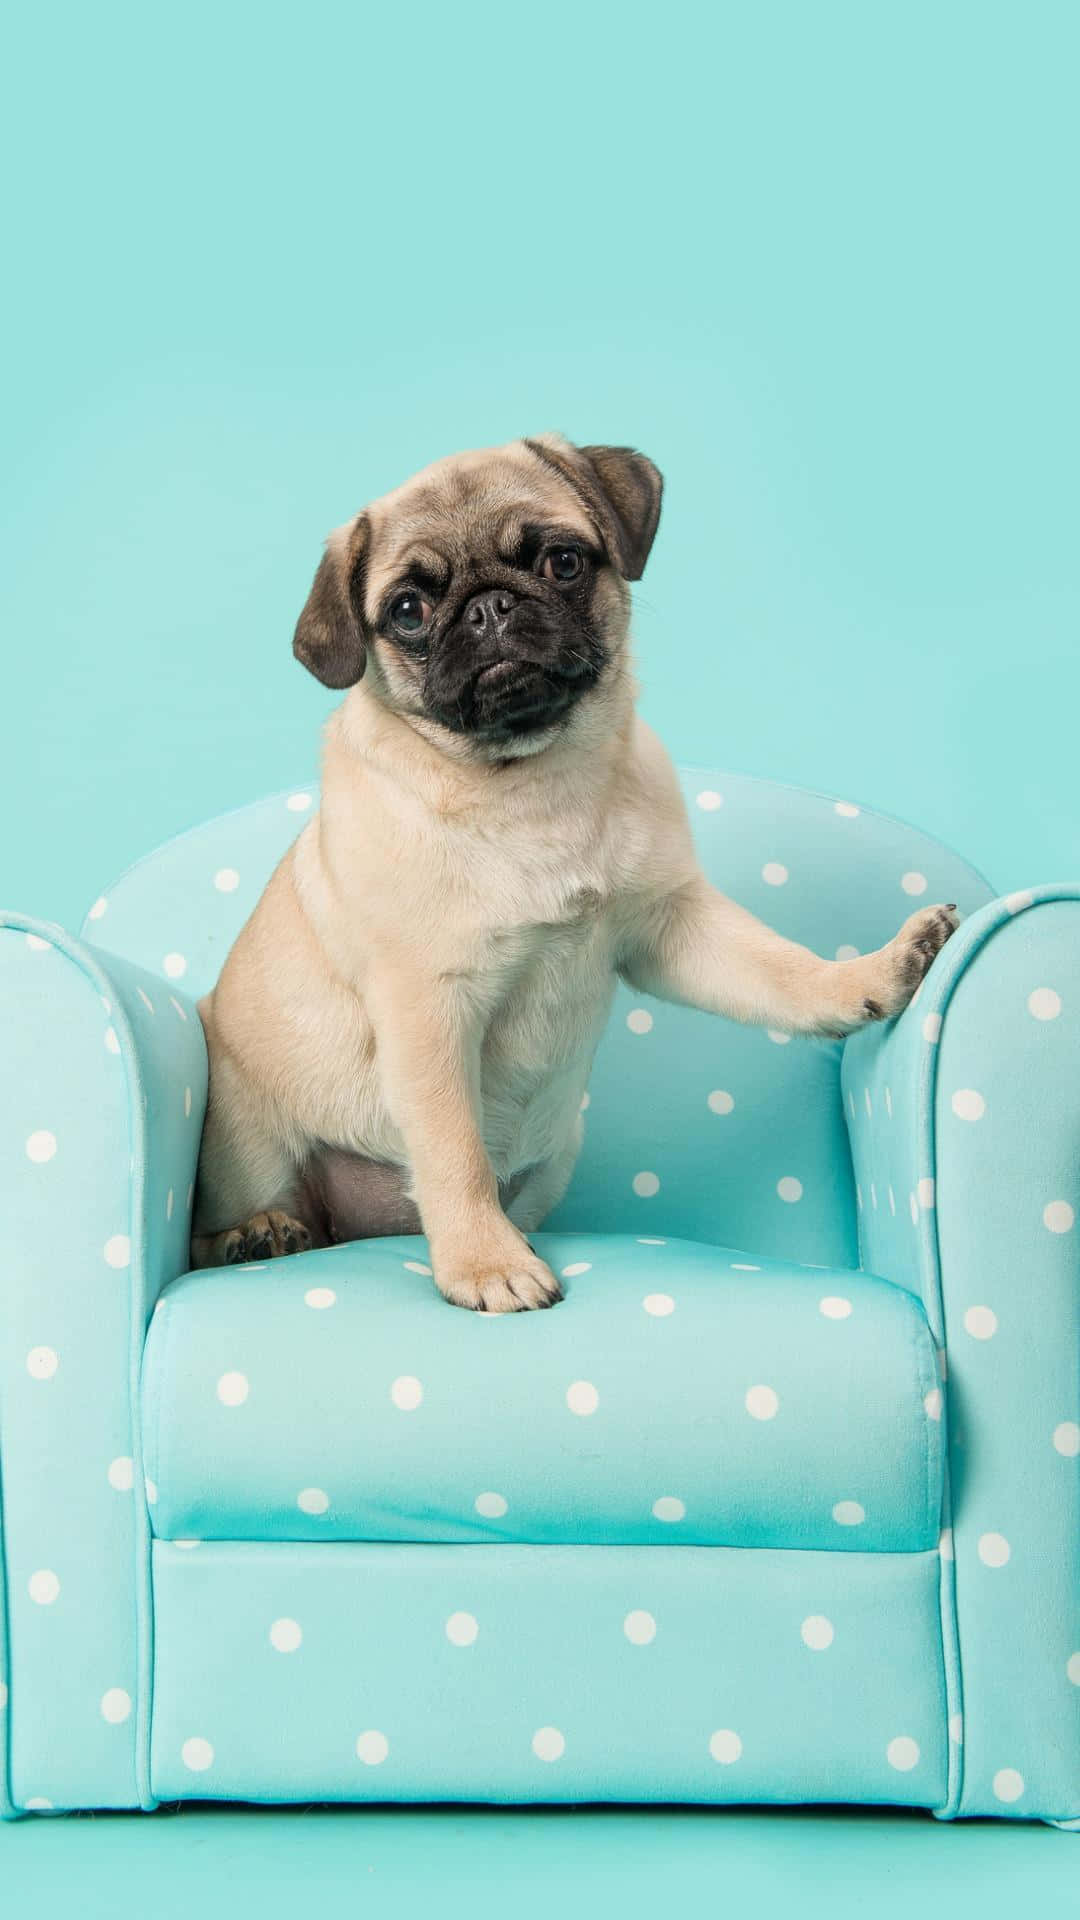 This Pug Is Ready For Bed! Wallpaper